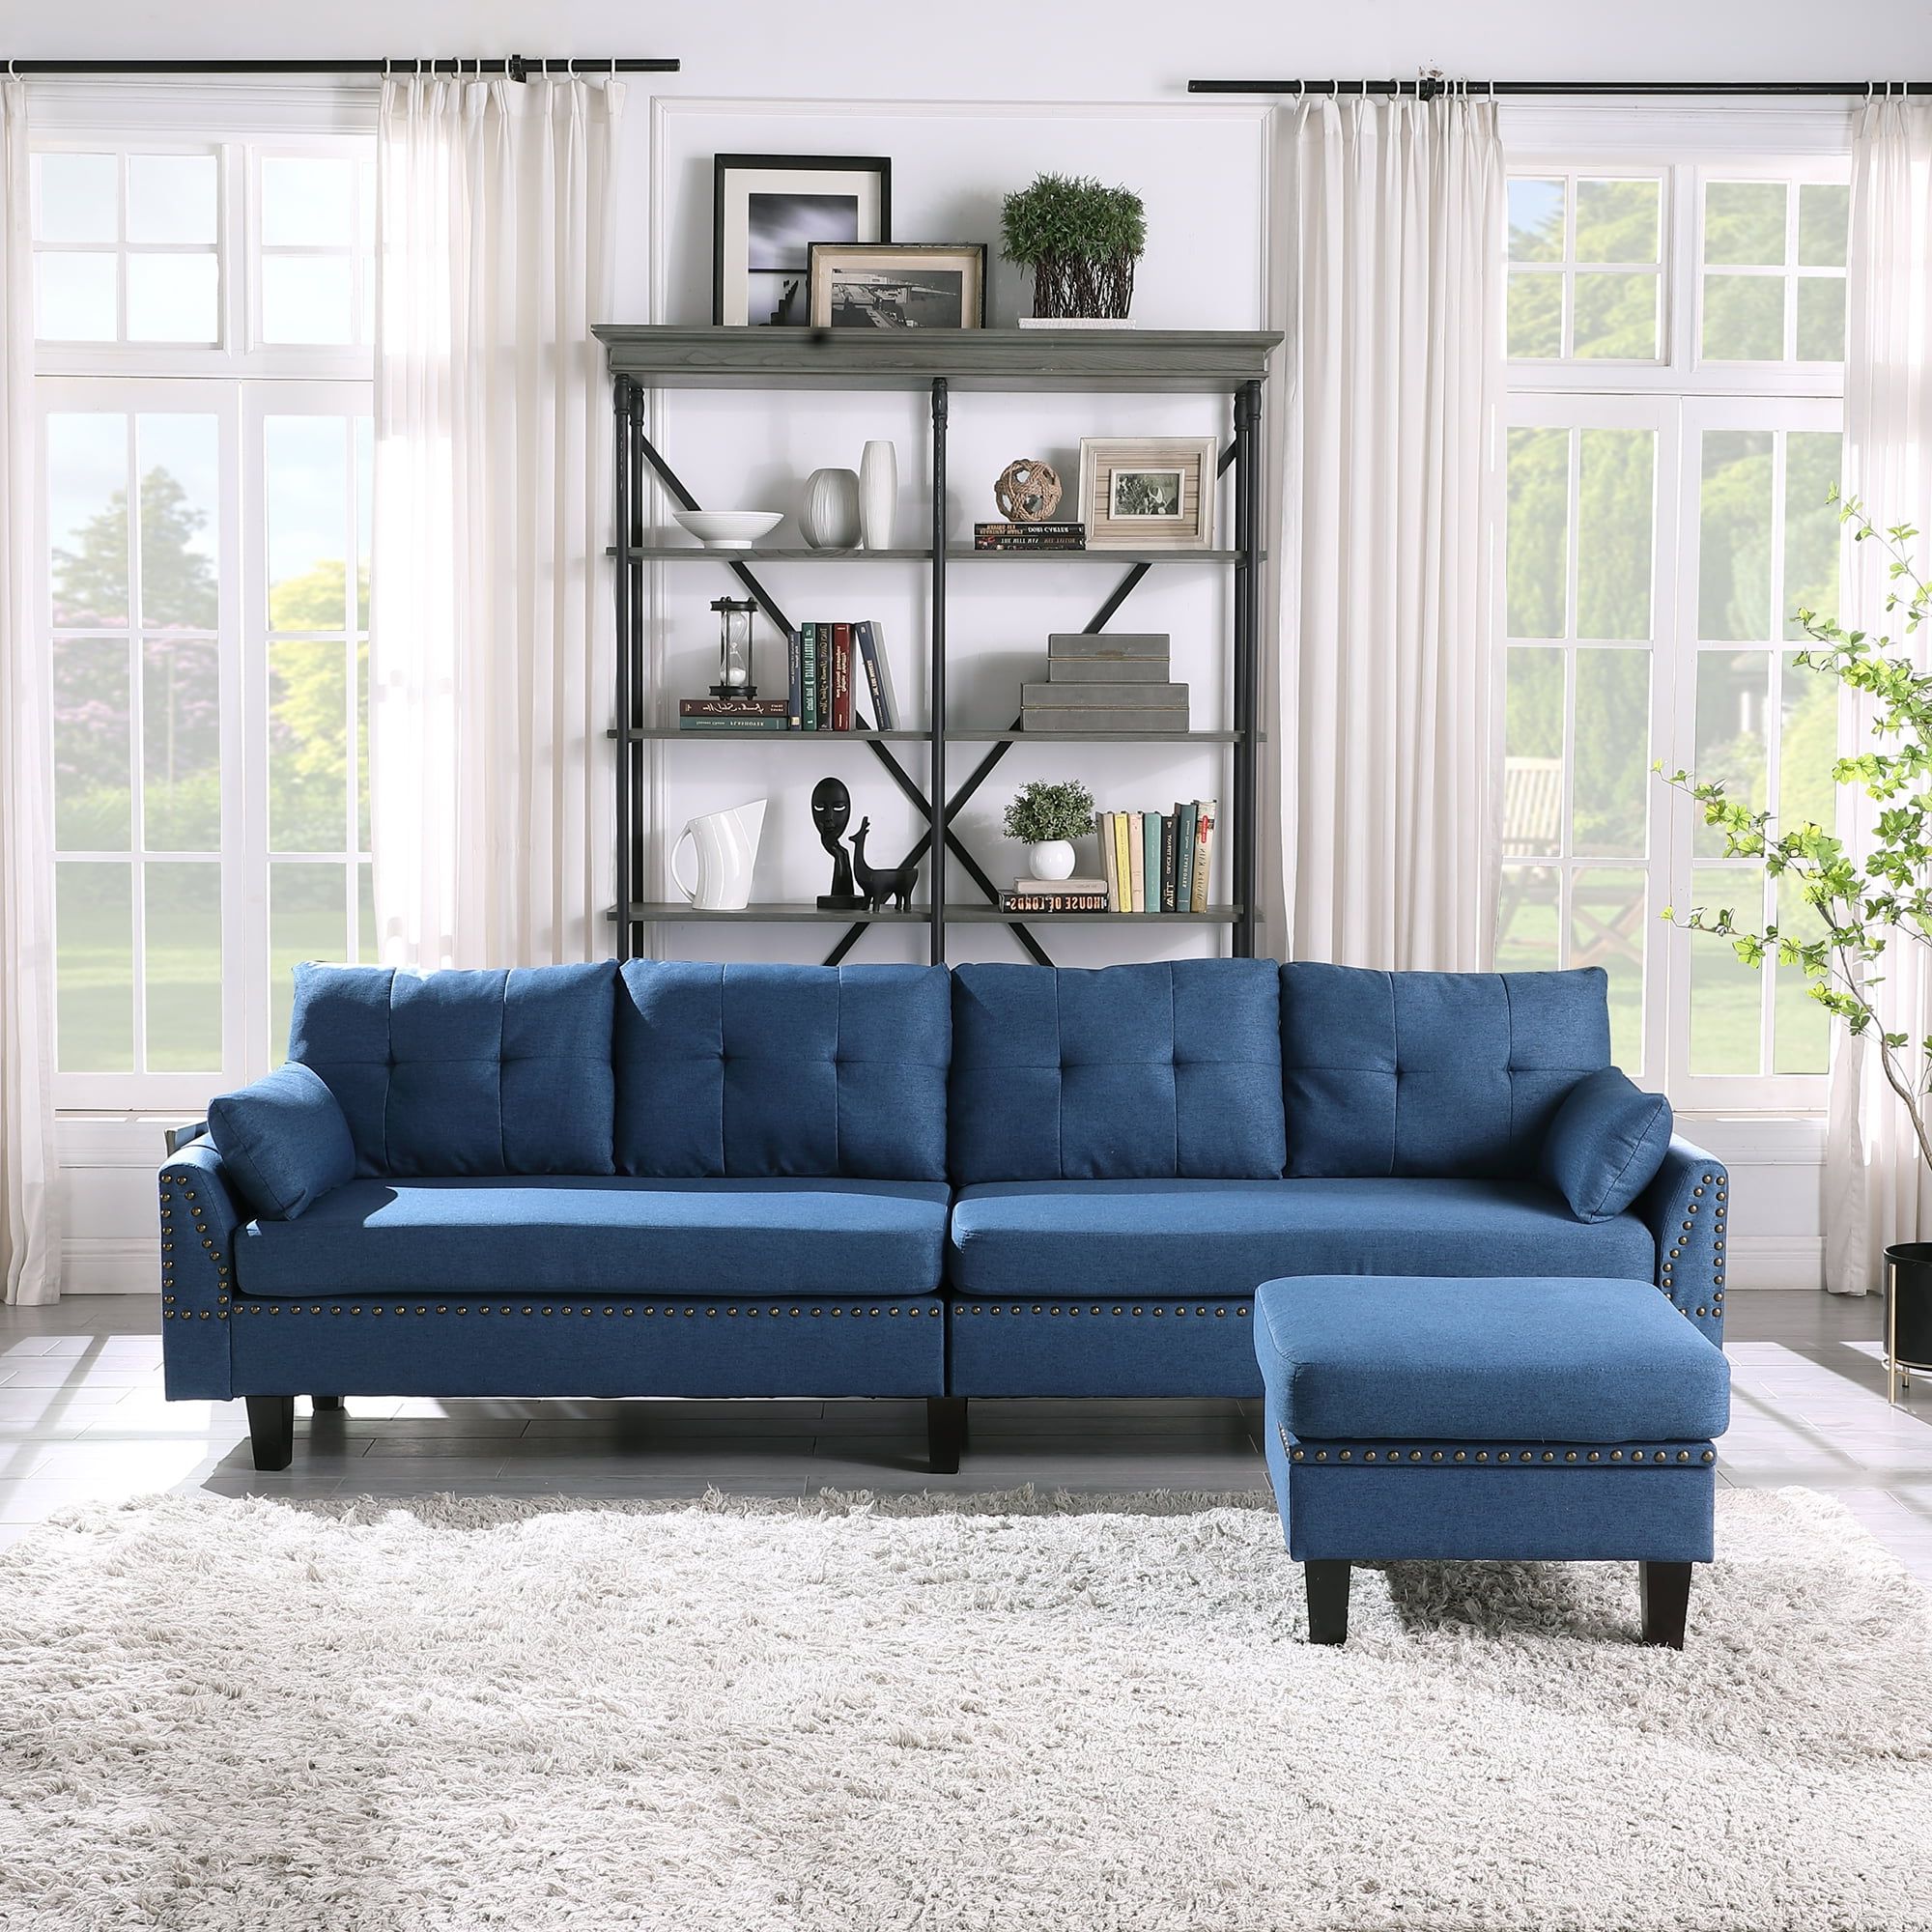 Urhomepro Mid Century Couches And Sofas With Ottoman, 2 Pillows, Modern With Sofas With Ottomans (View 13 of 20)